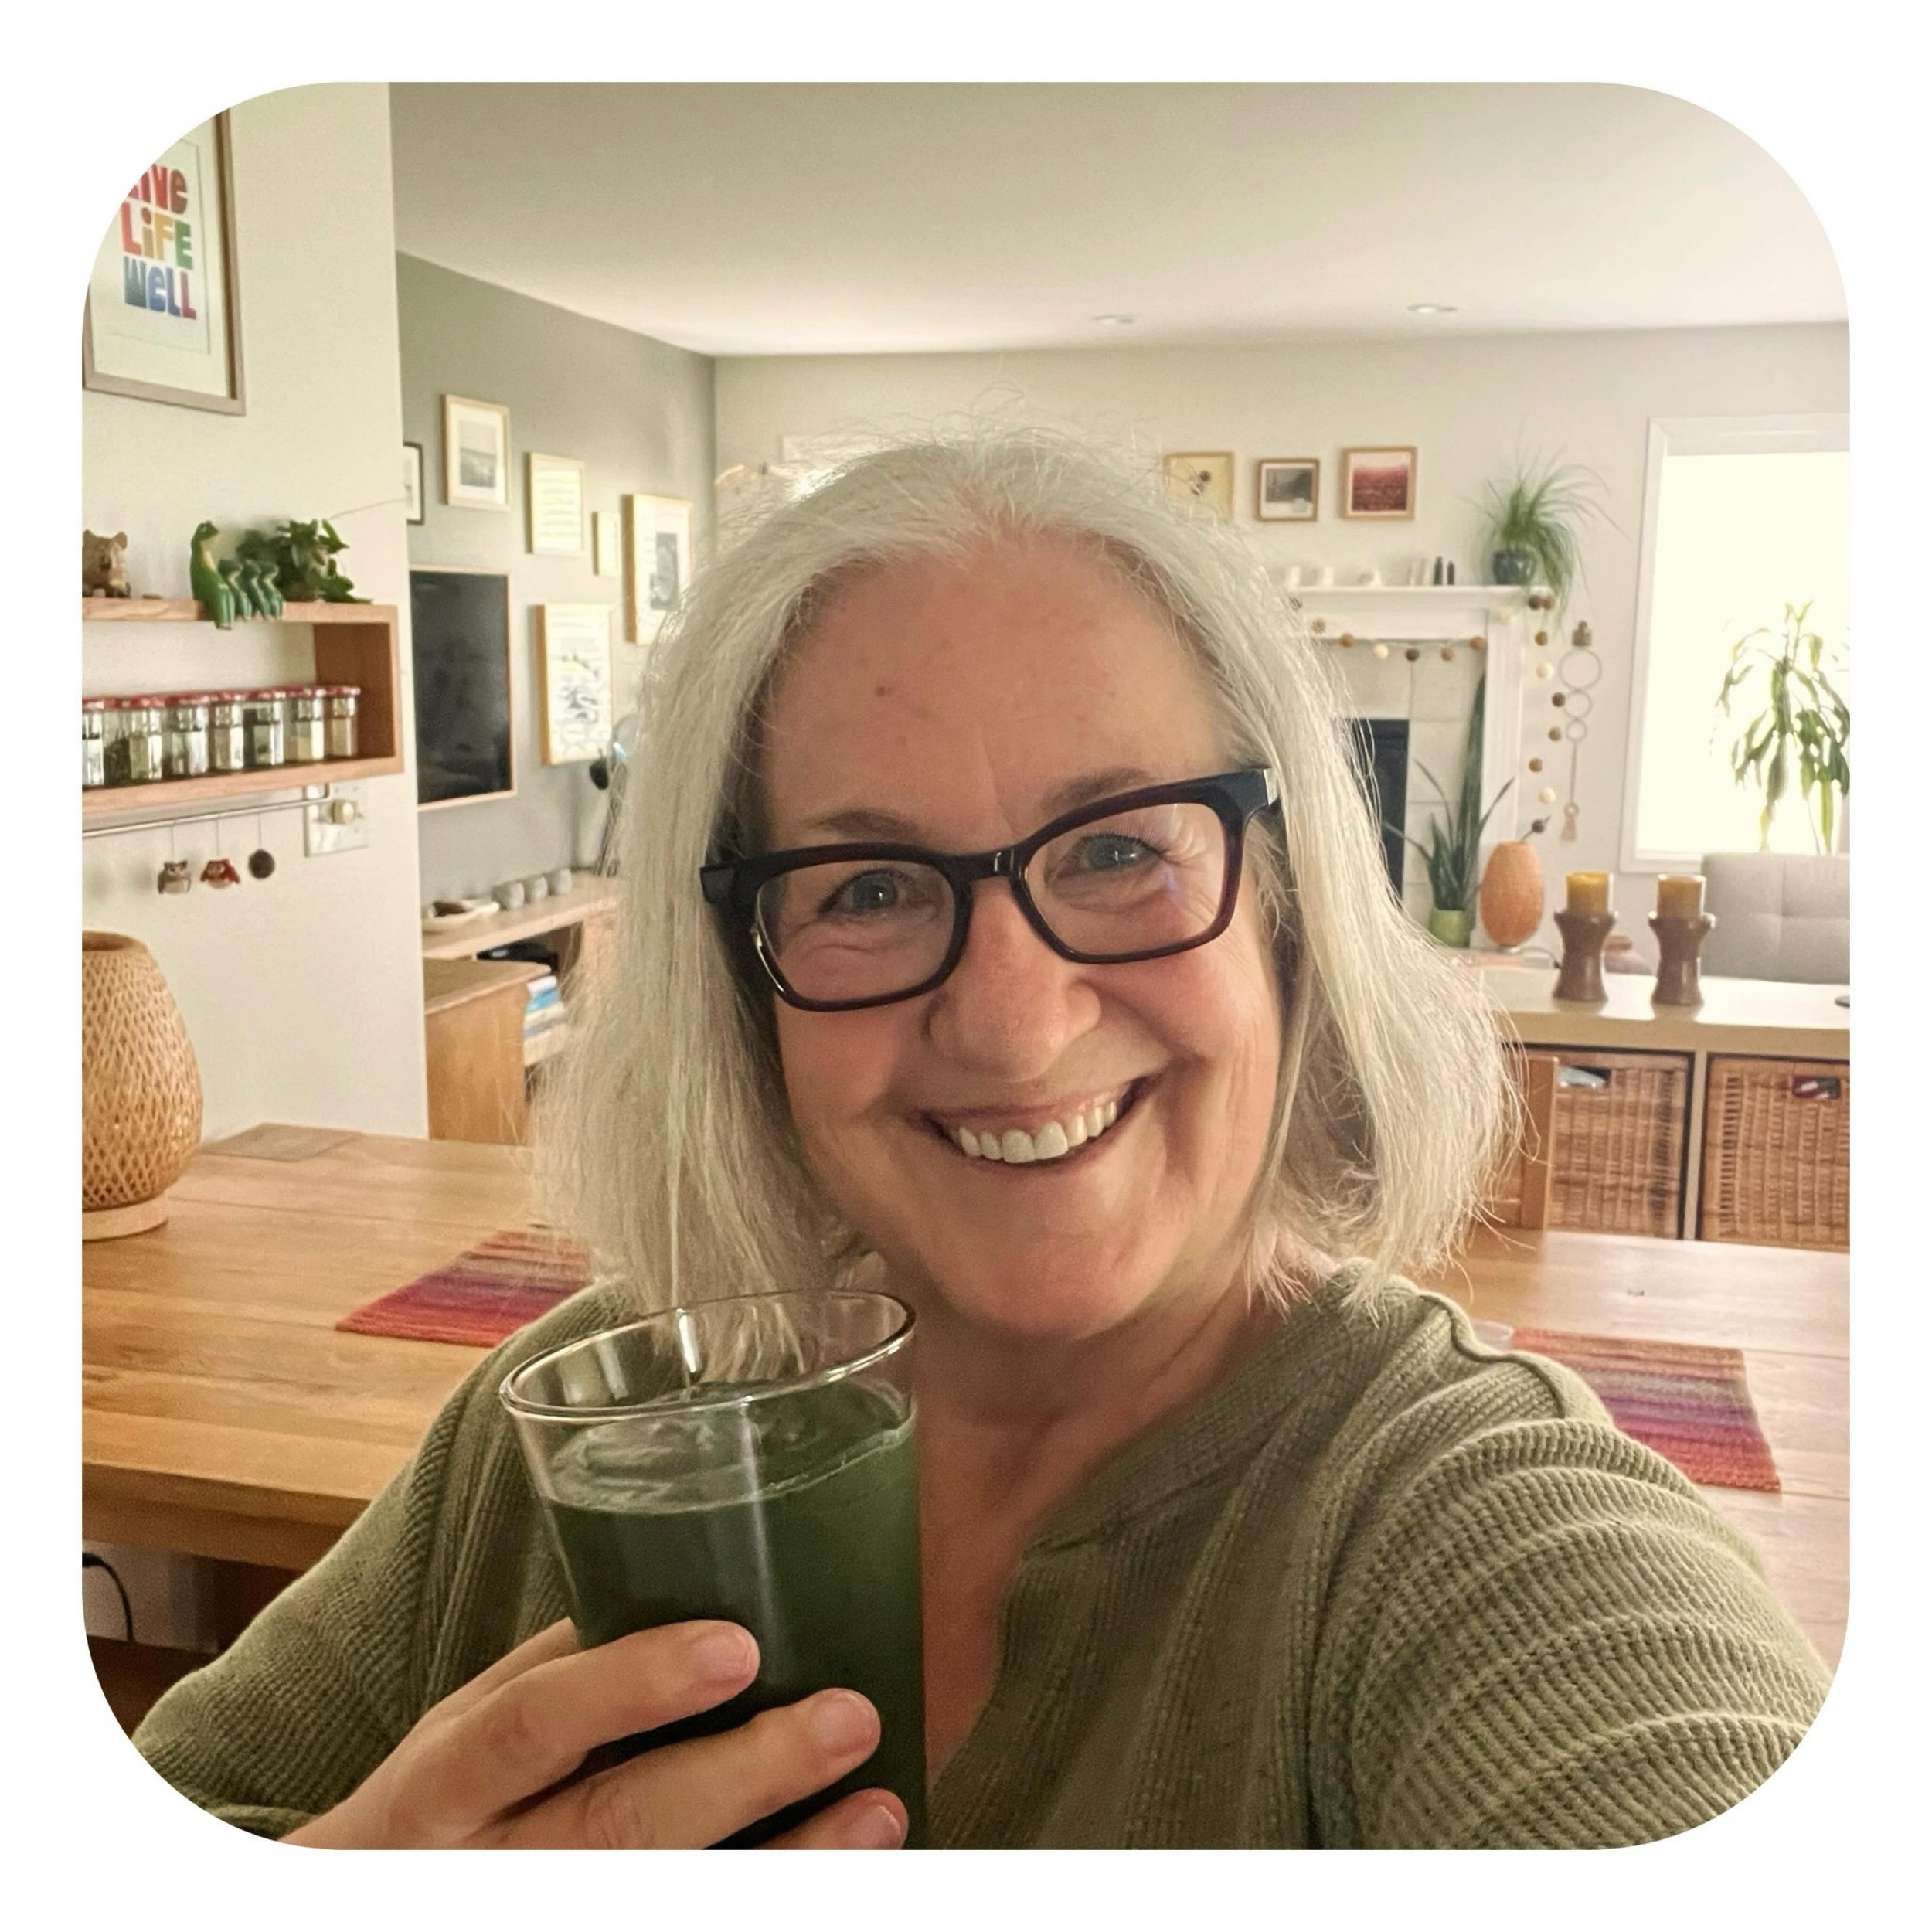 320 cals &bull; Breakfast: Stocked up on coconut water and green smoothies are back this week 🥑🥬🥥

Our 2-mile walk this morning was a little tough but I did it and am happy for it. This is when pure stubbornness keeps me going 💪

Didn&rsquo;t pos